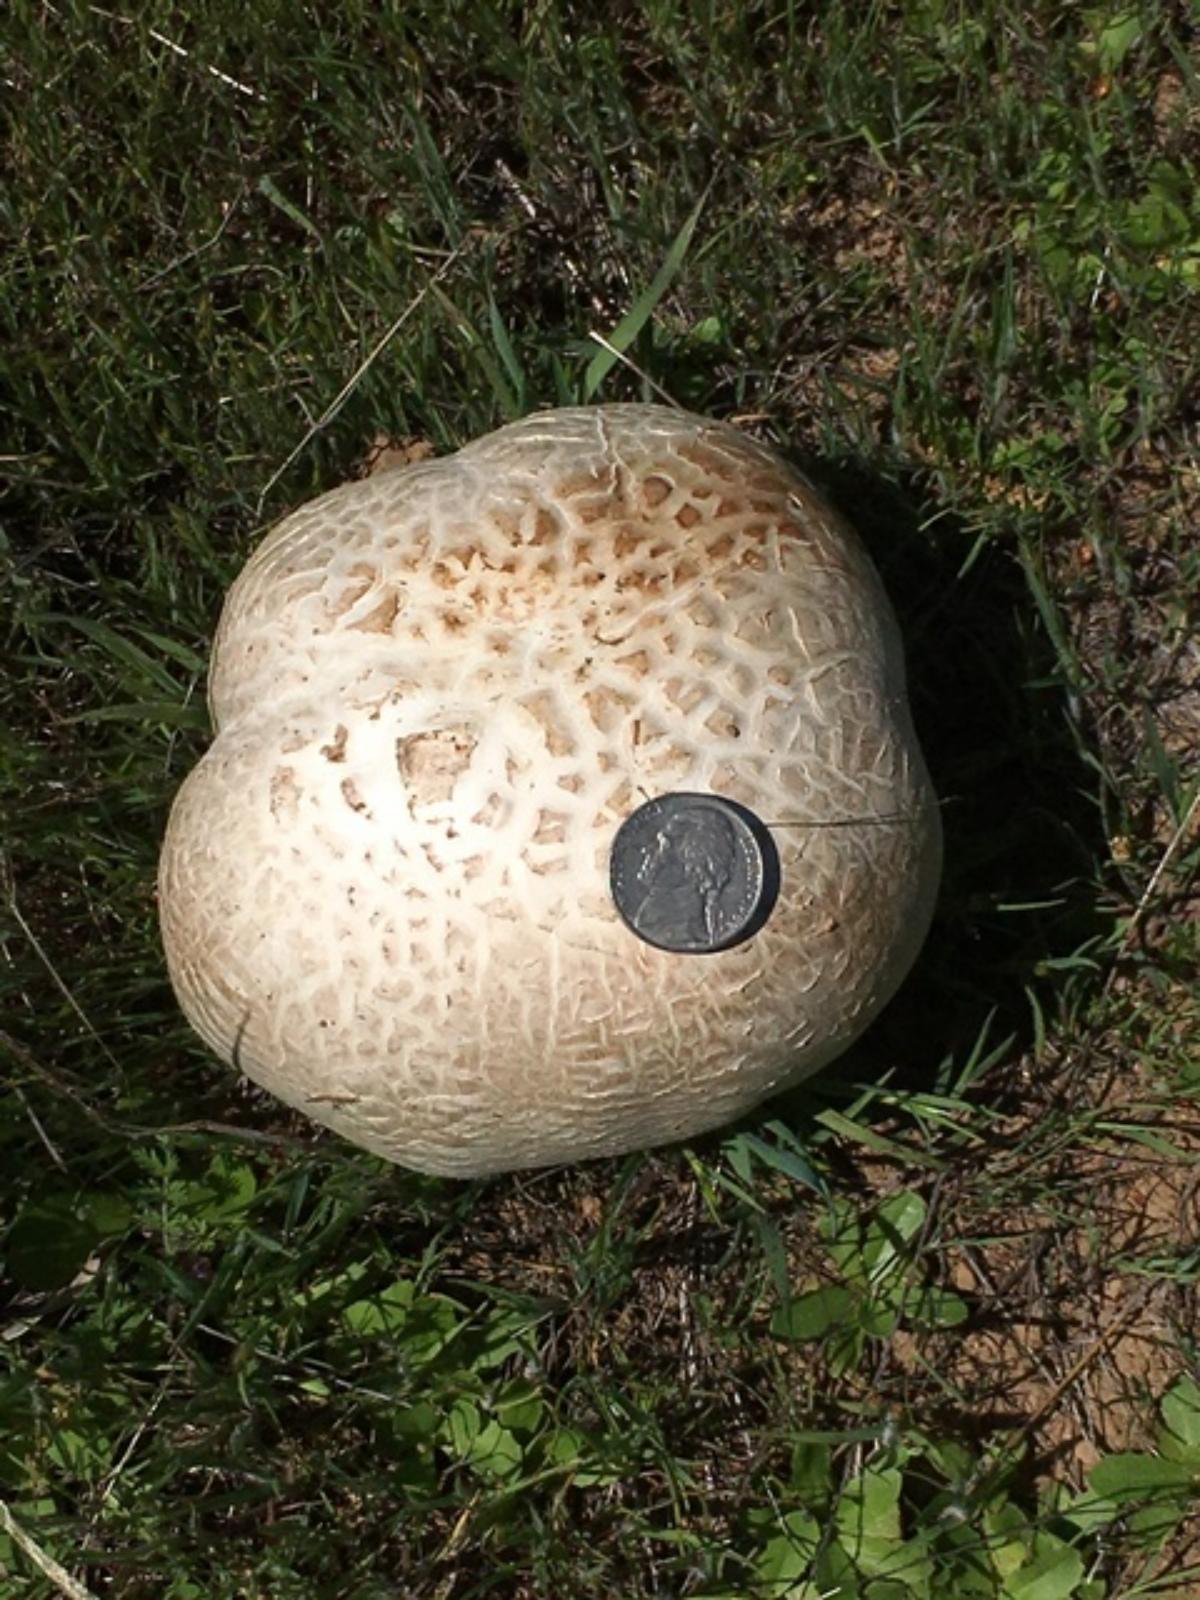 Calvatia booniana with nickel on top to show size